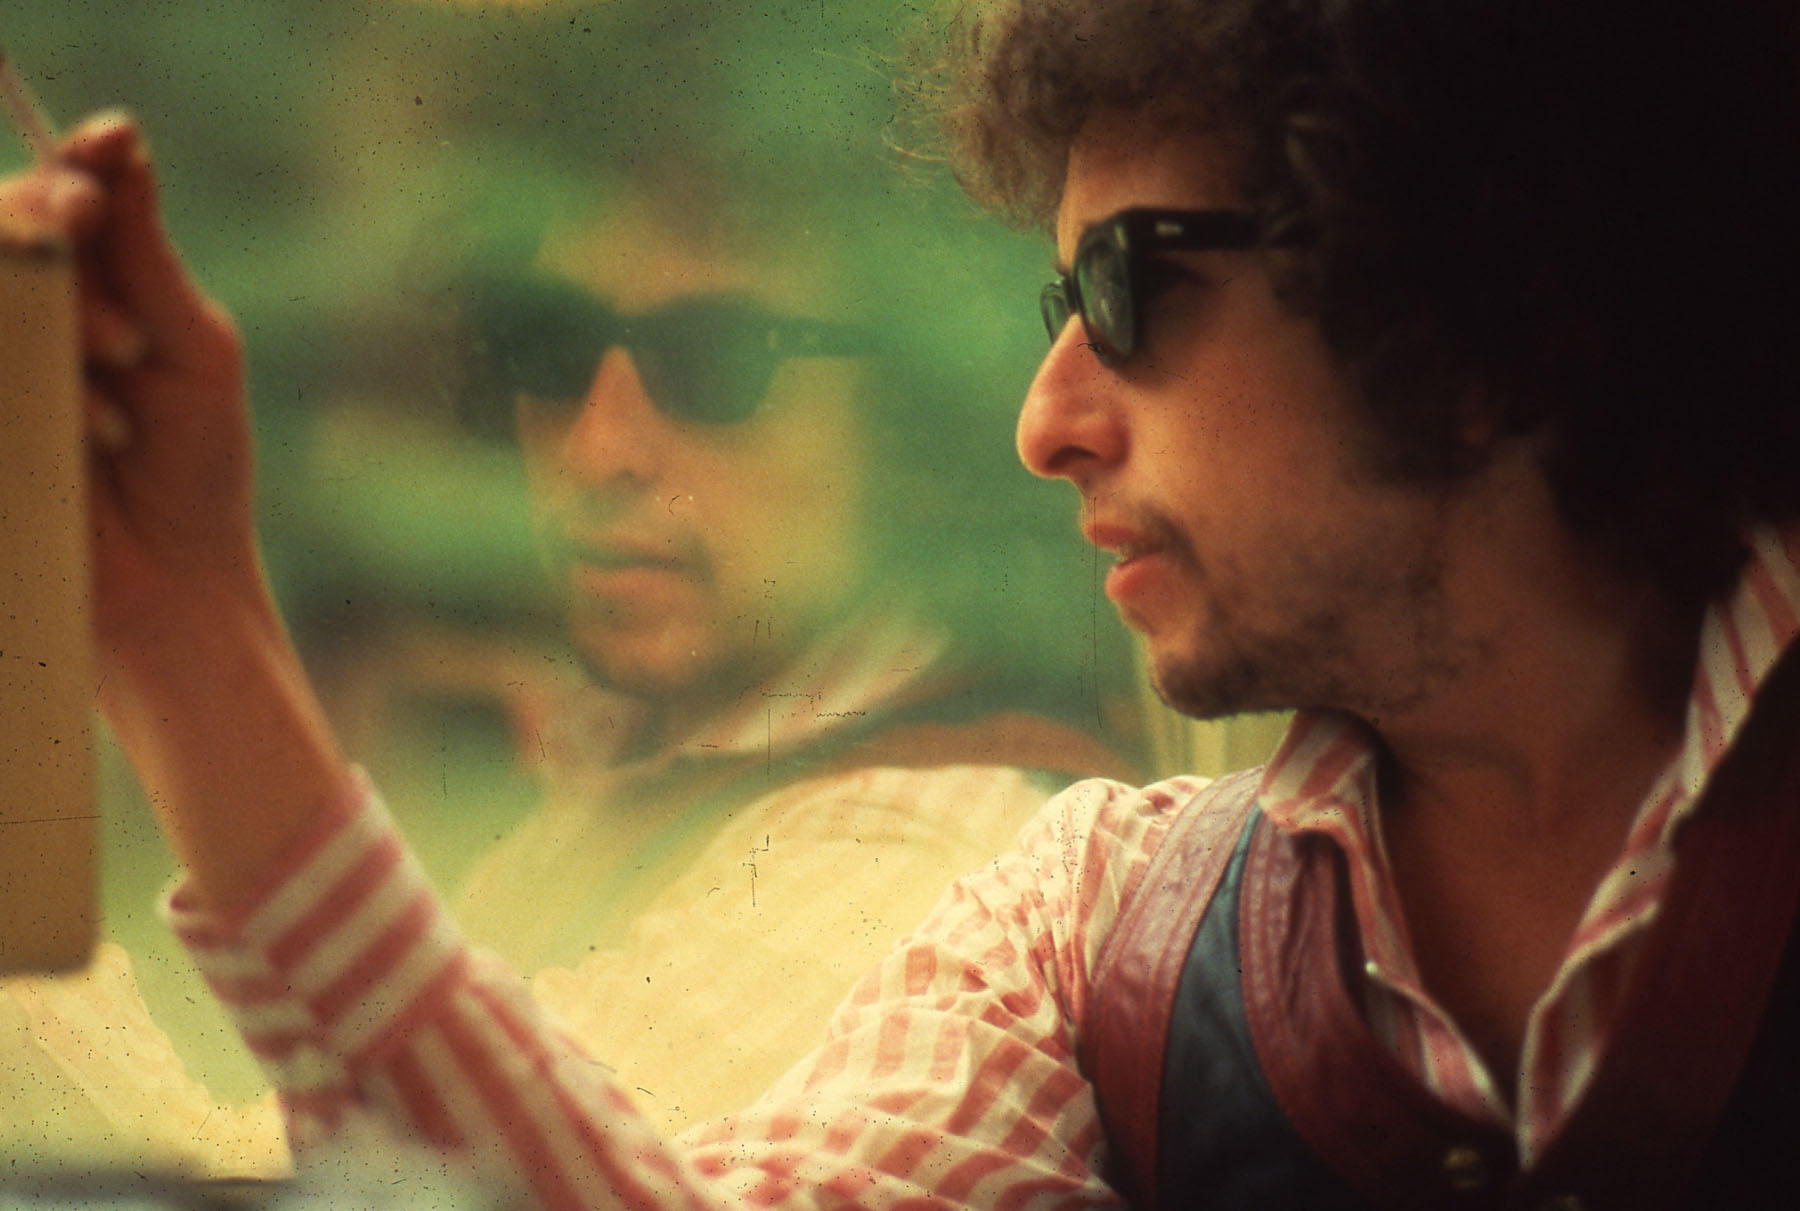 Universal Music Group acquires BOB DYLAN’S entire catalogue of songs 